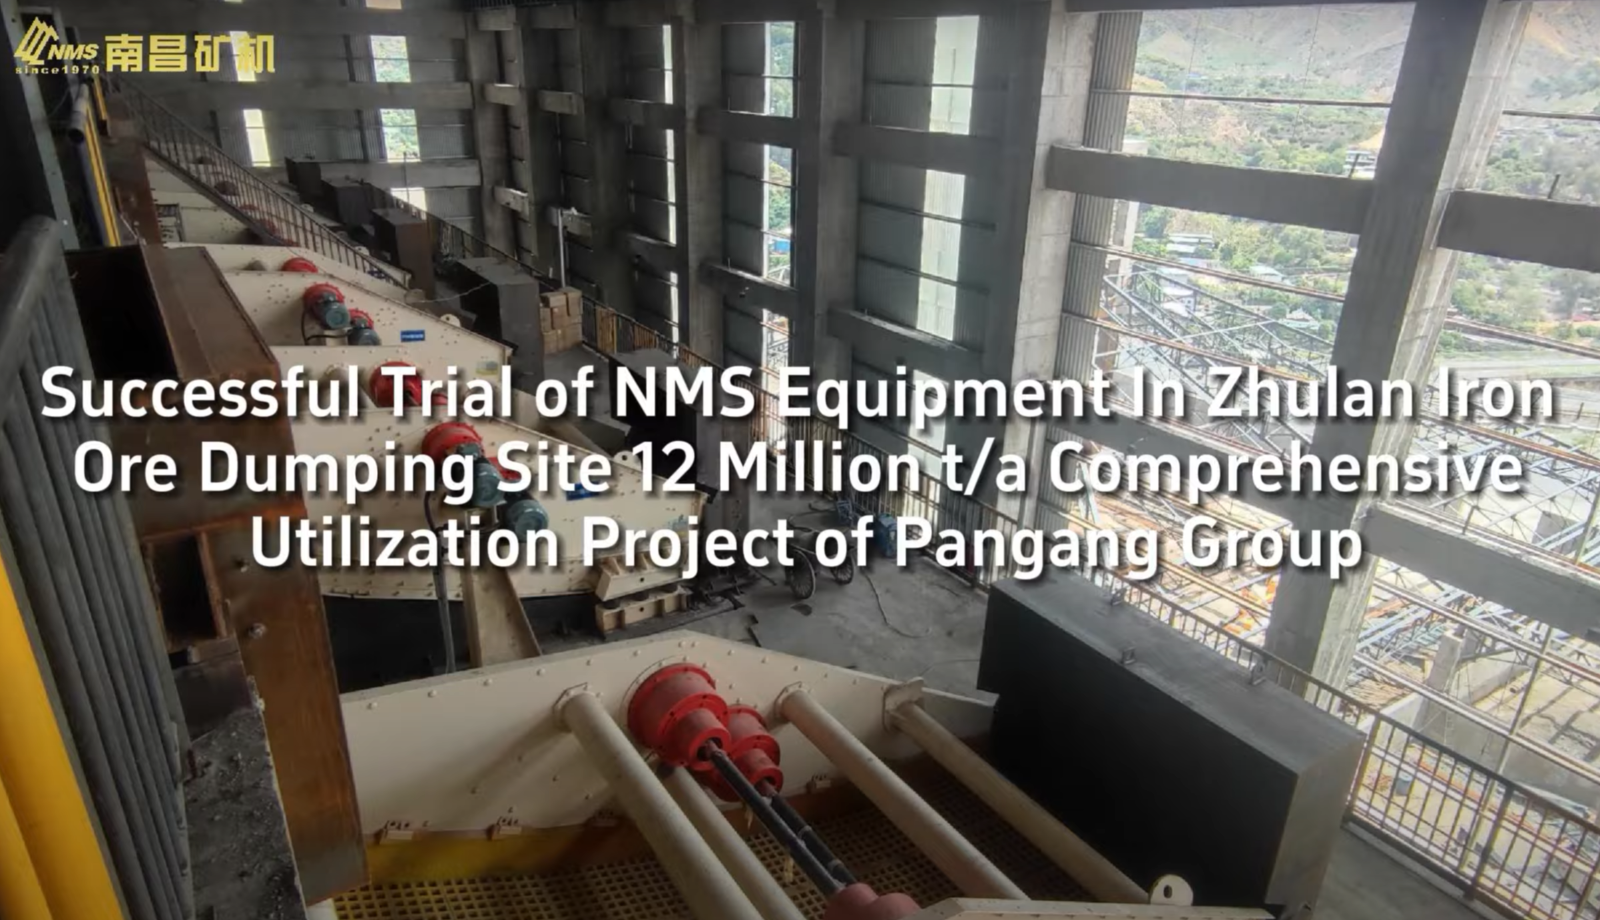 Successful Trial of NMS！ Equipment  In Zhulan Iron Ore Dumping Site 12 Million t/a Comprehensive Utilization Project of Pangang Group